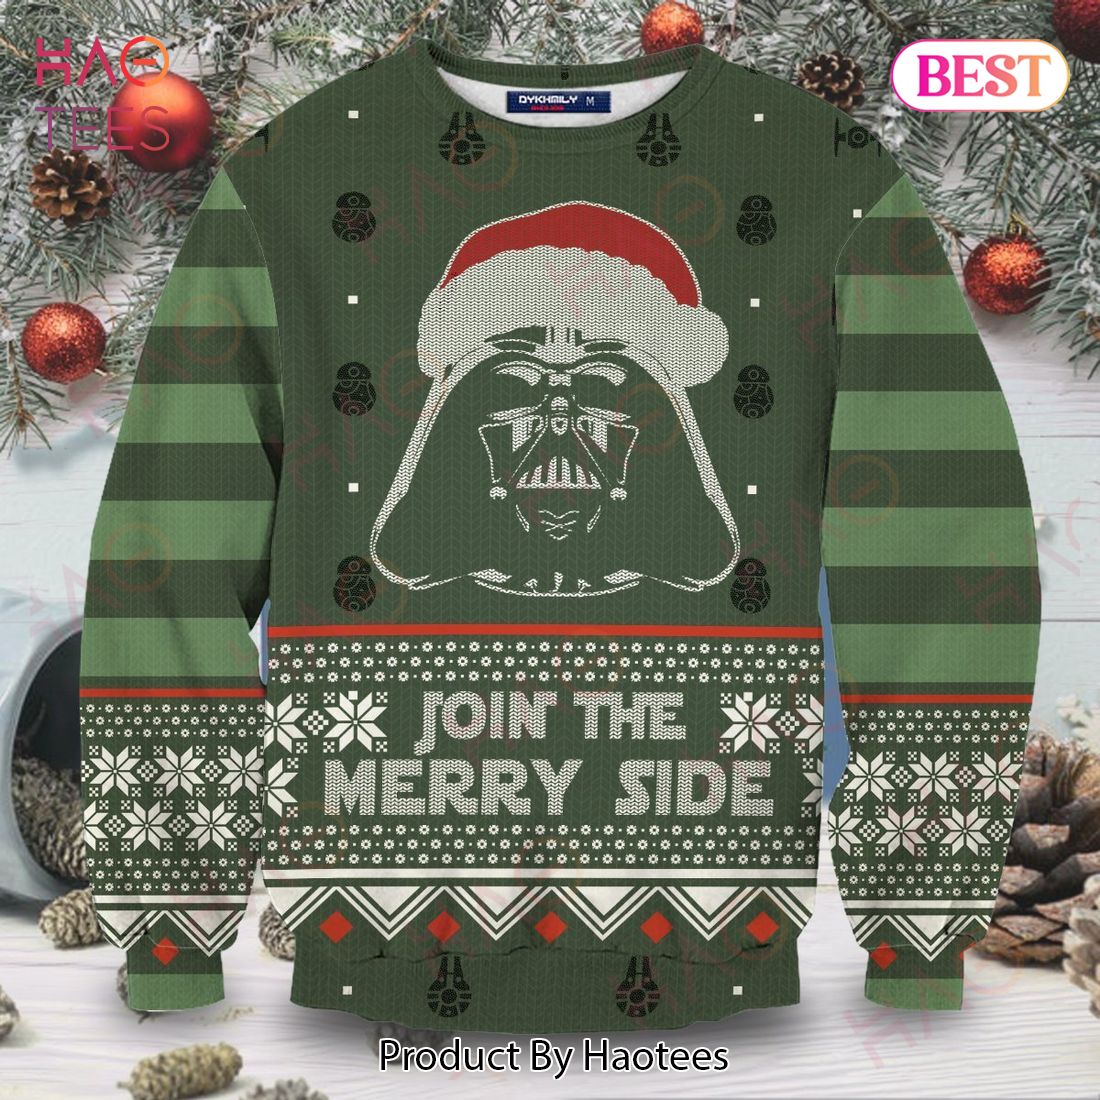 SW Ugly Sweater Join The Merry Side Sith Christmas Pattern Green Sweater 2022